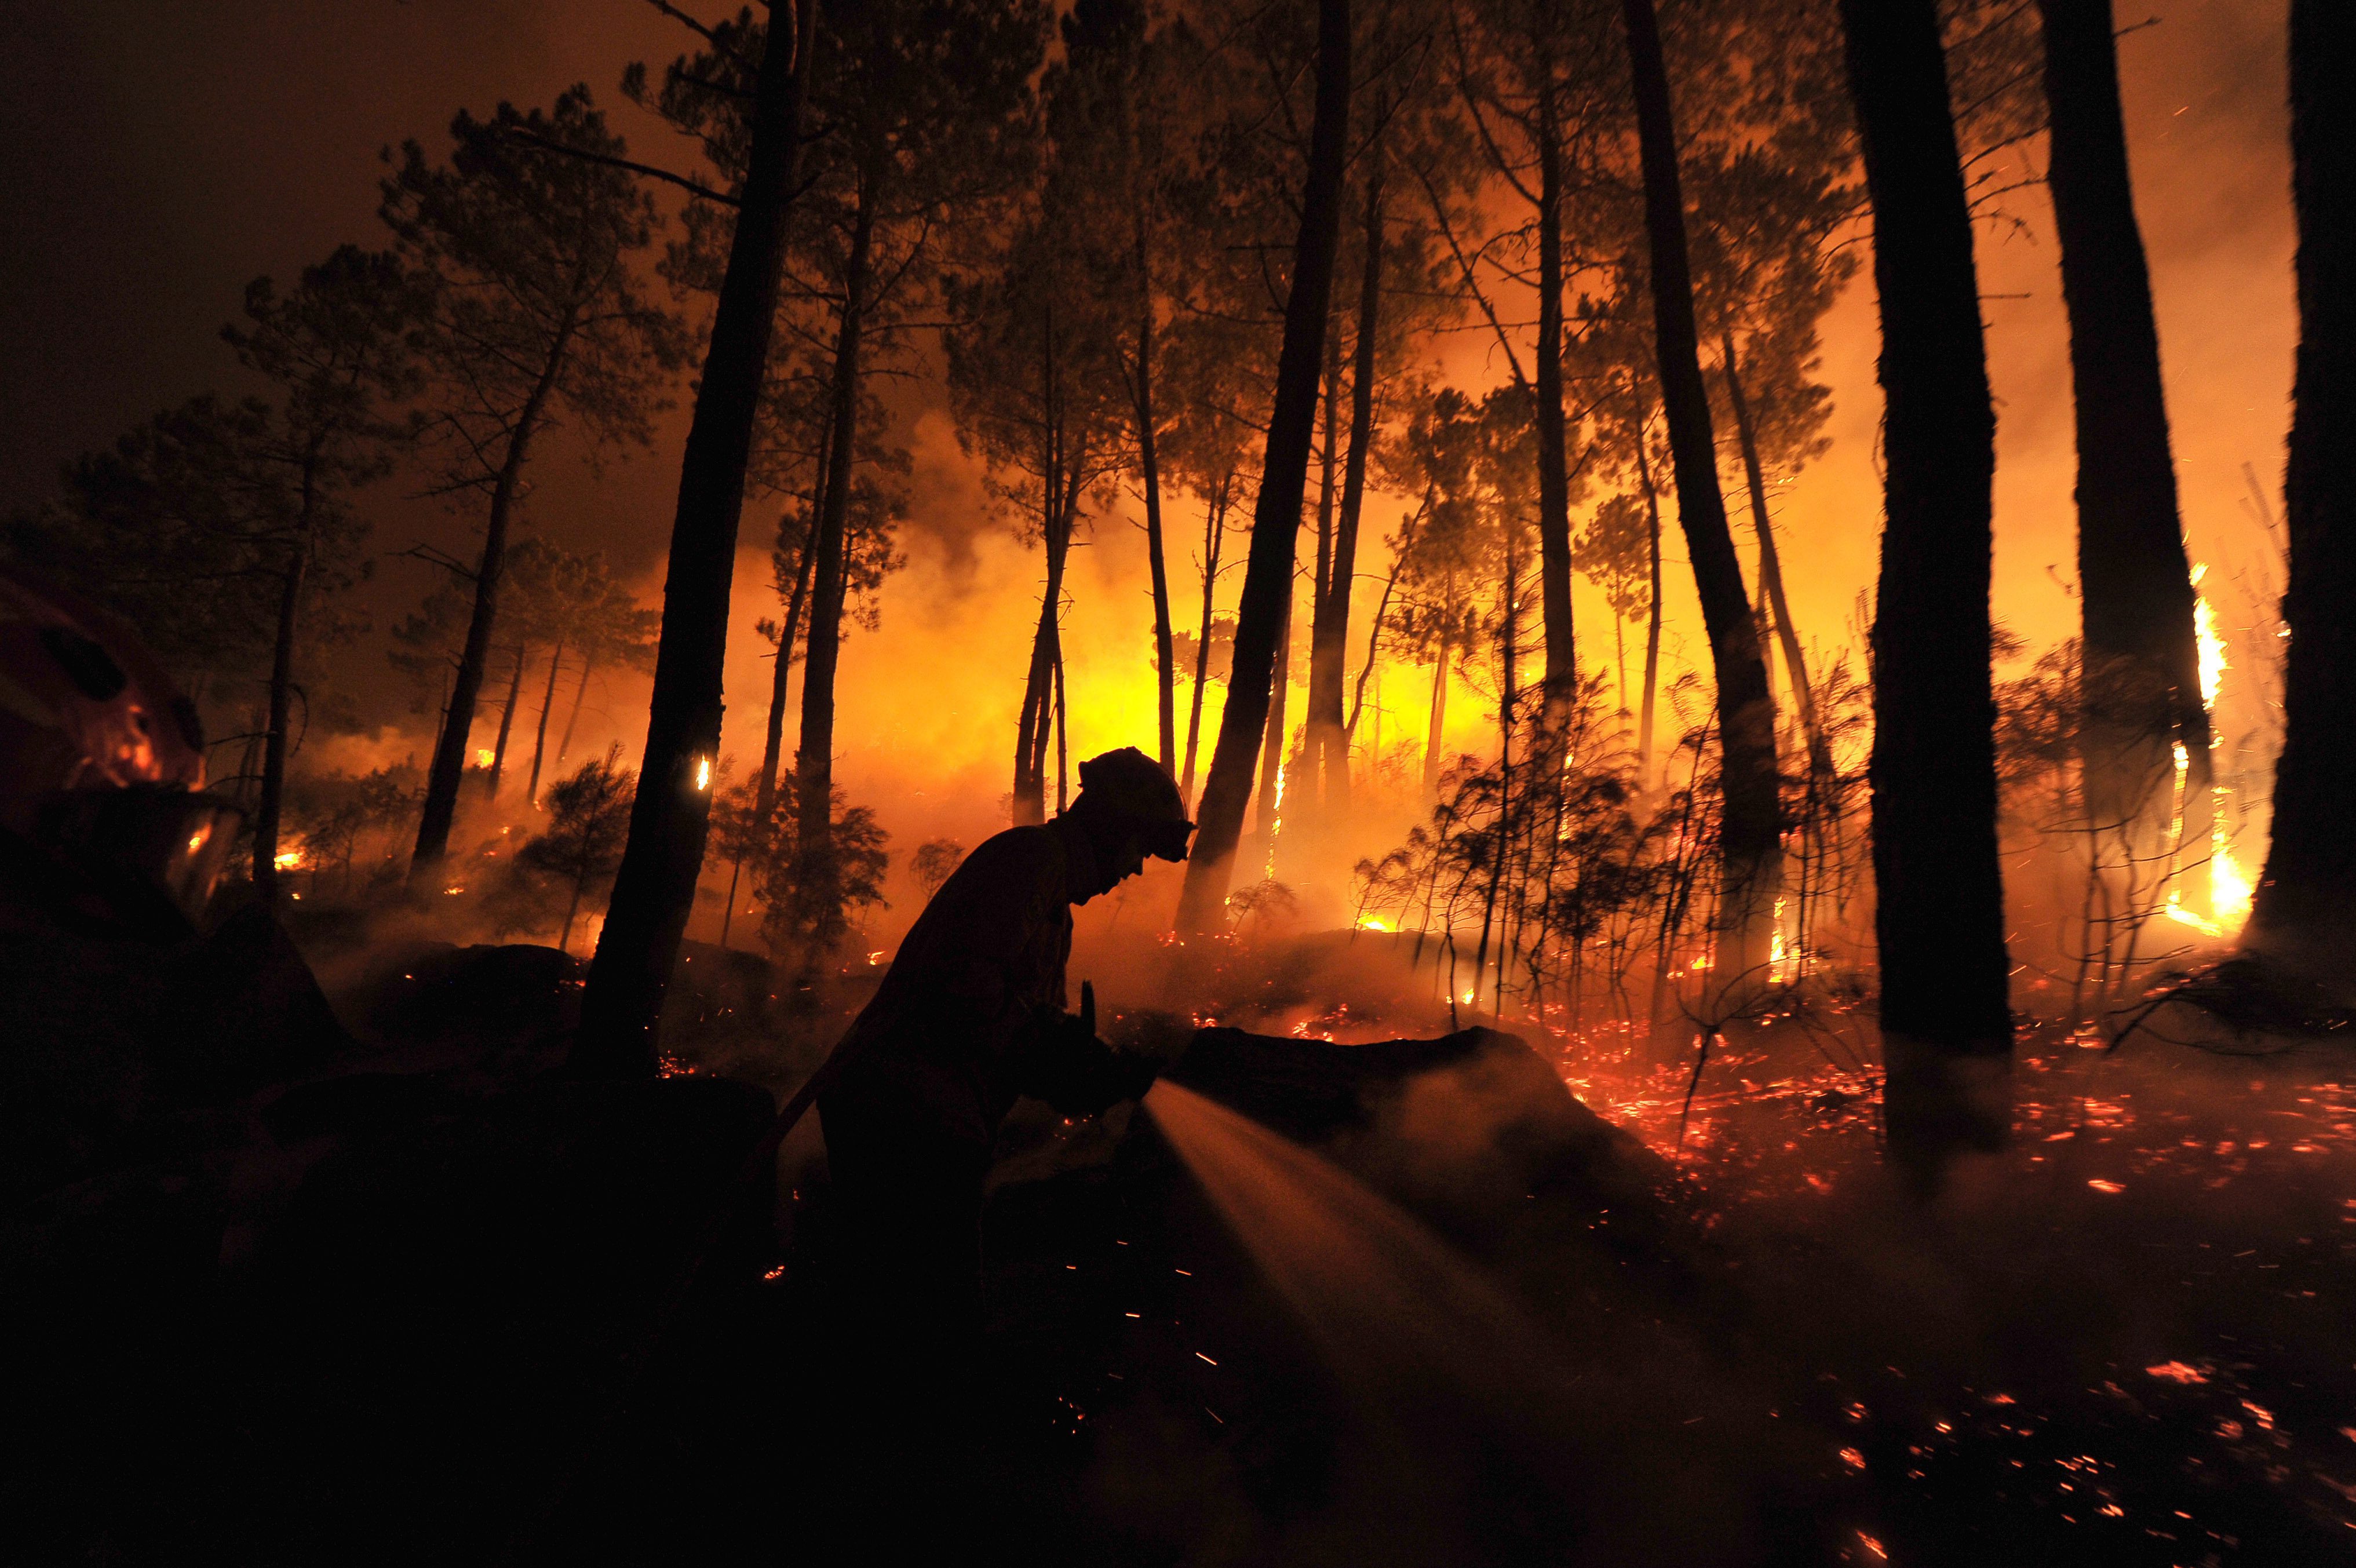 Firemen are silhouetted against the flames as they fight a forest fire in Portugal during August 2013. Photo: EPA